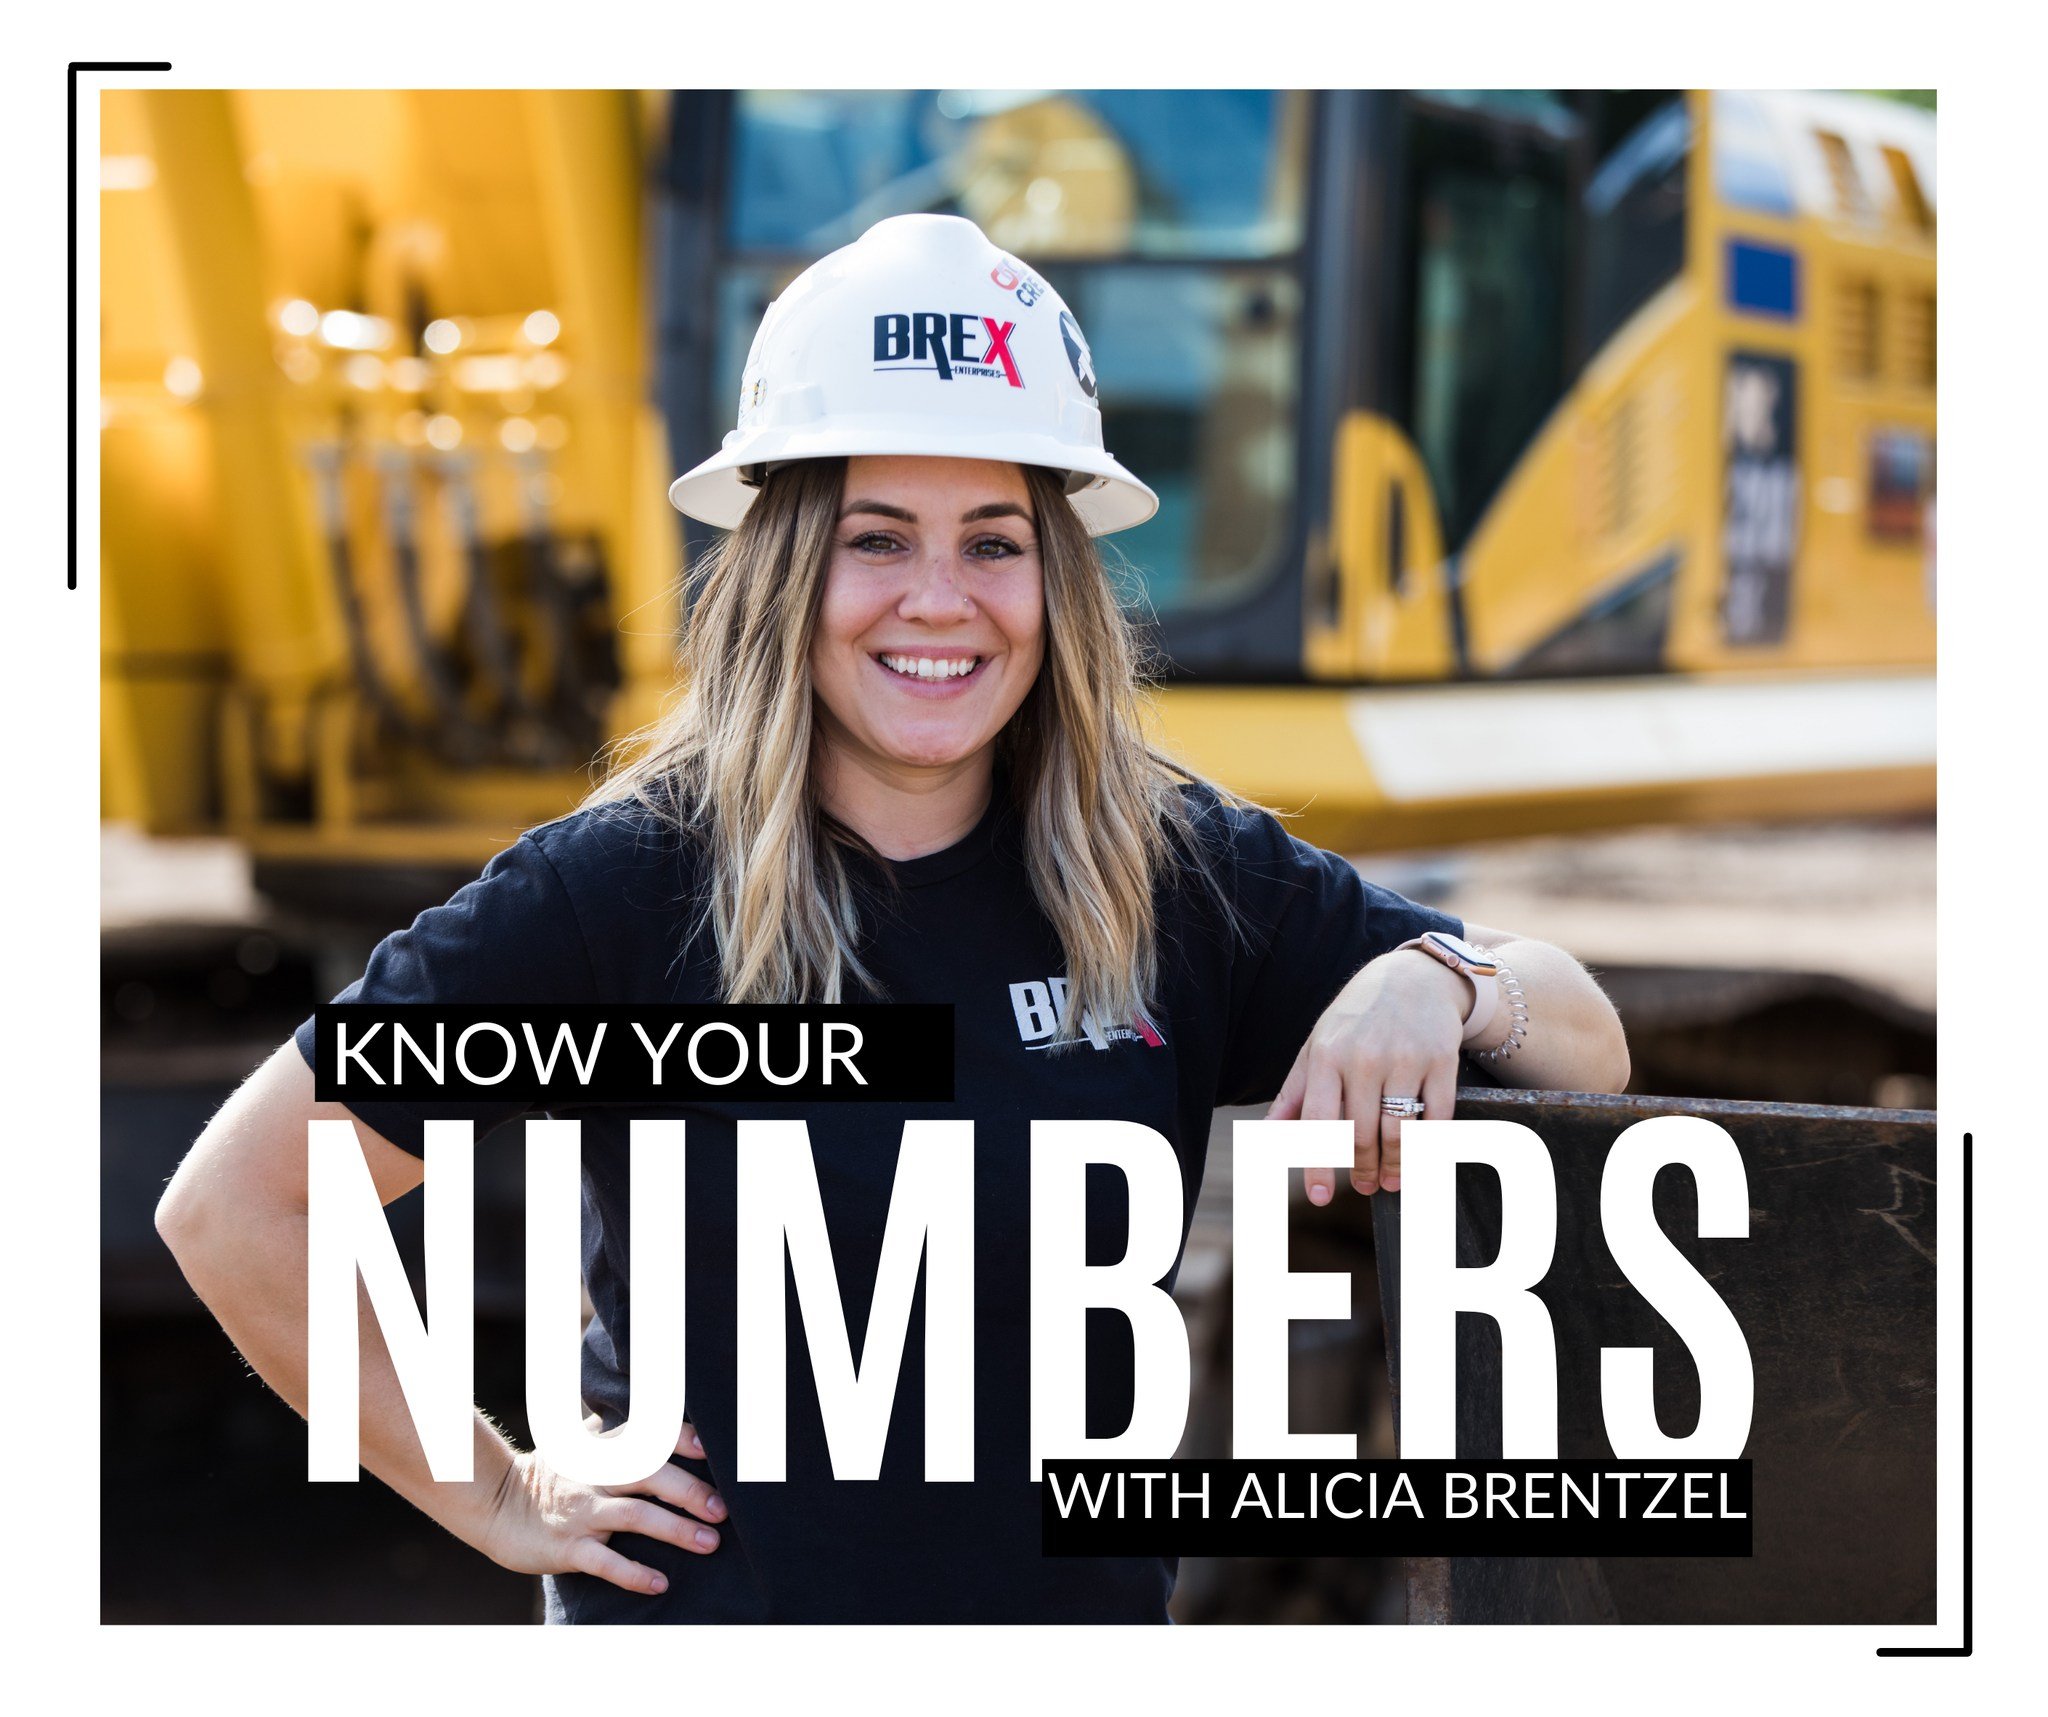 Members only event! 📣

Come join us May 13th for a fantastic session with Alicia Brentzel. Not a member yet? No problem! Click the link in our bio to sign up today for exclusive access to events like this one!